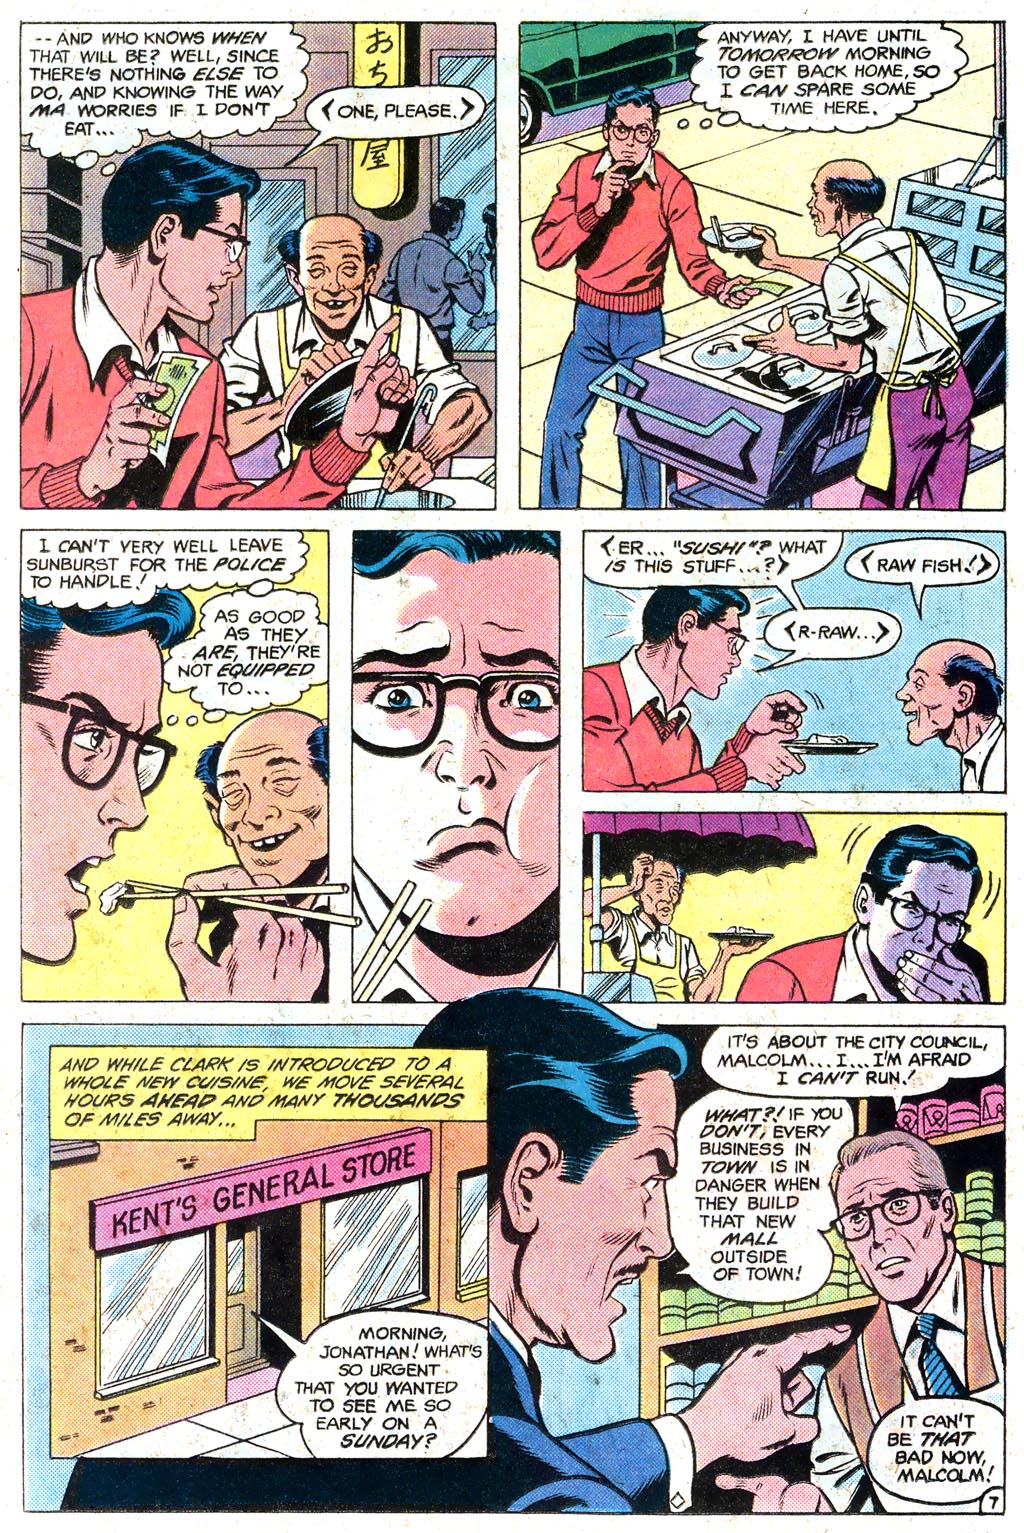 The New Adventures of Superboy 46 Page 10